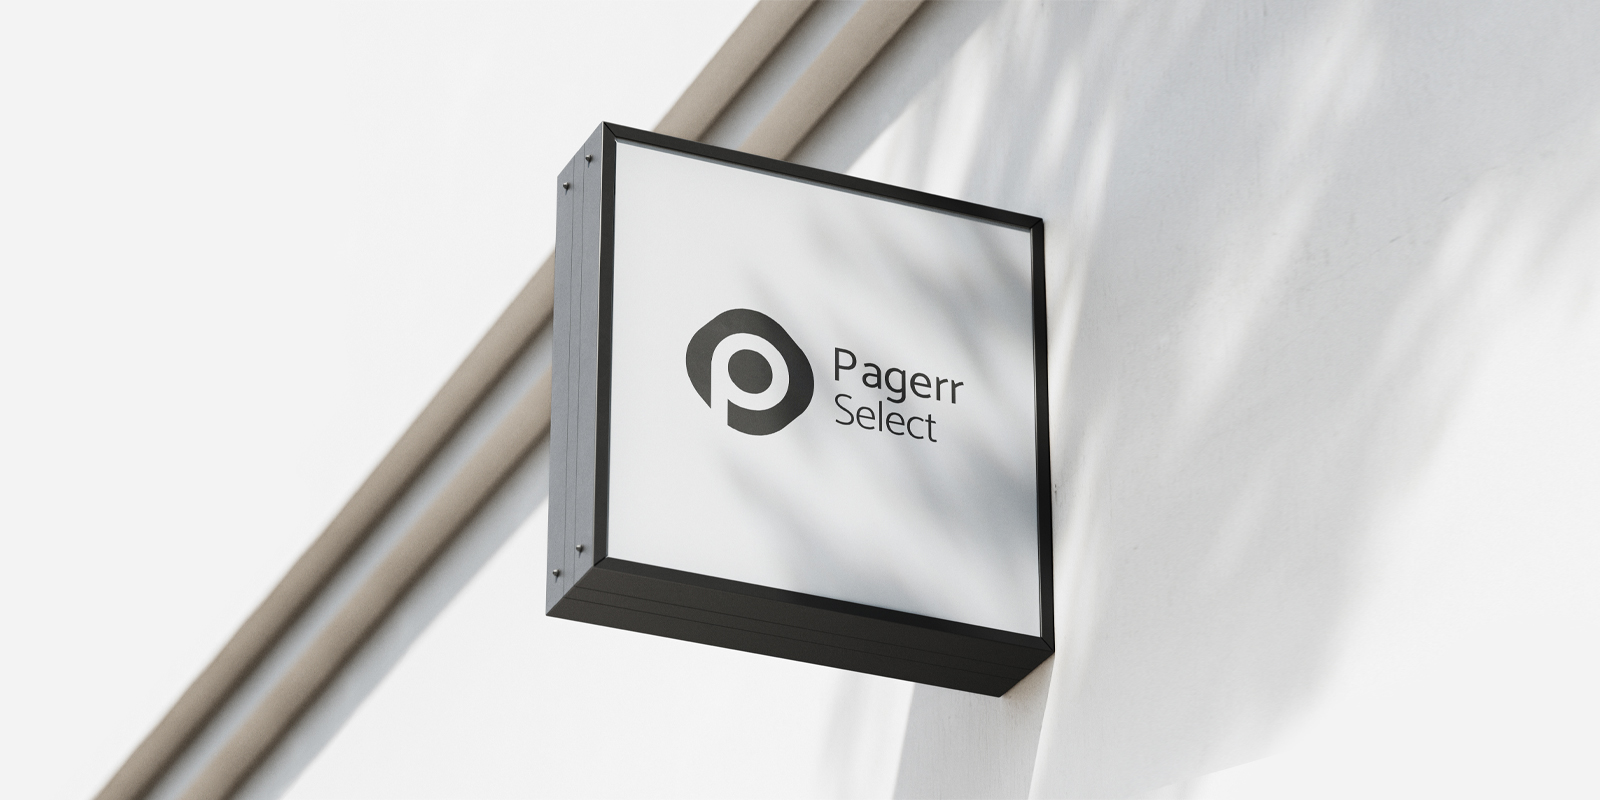 Essential signs in Berlin - Print with Pagerr